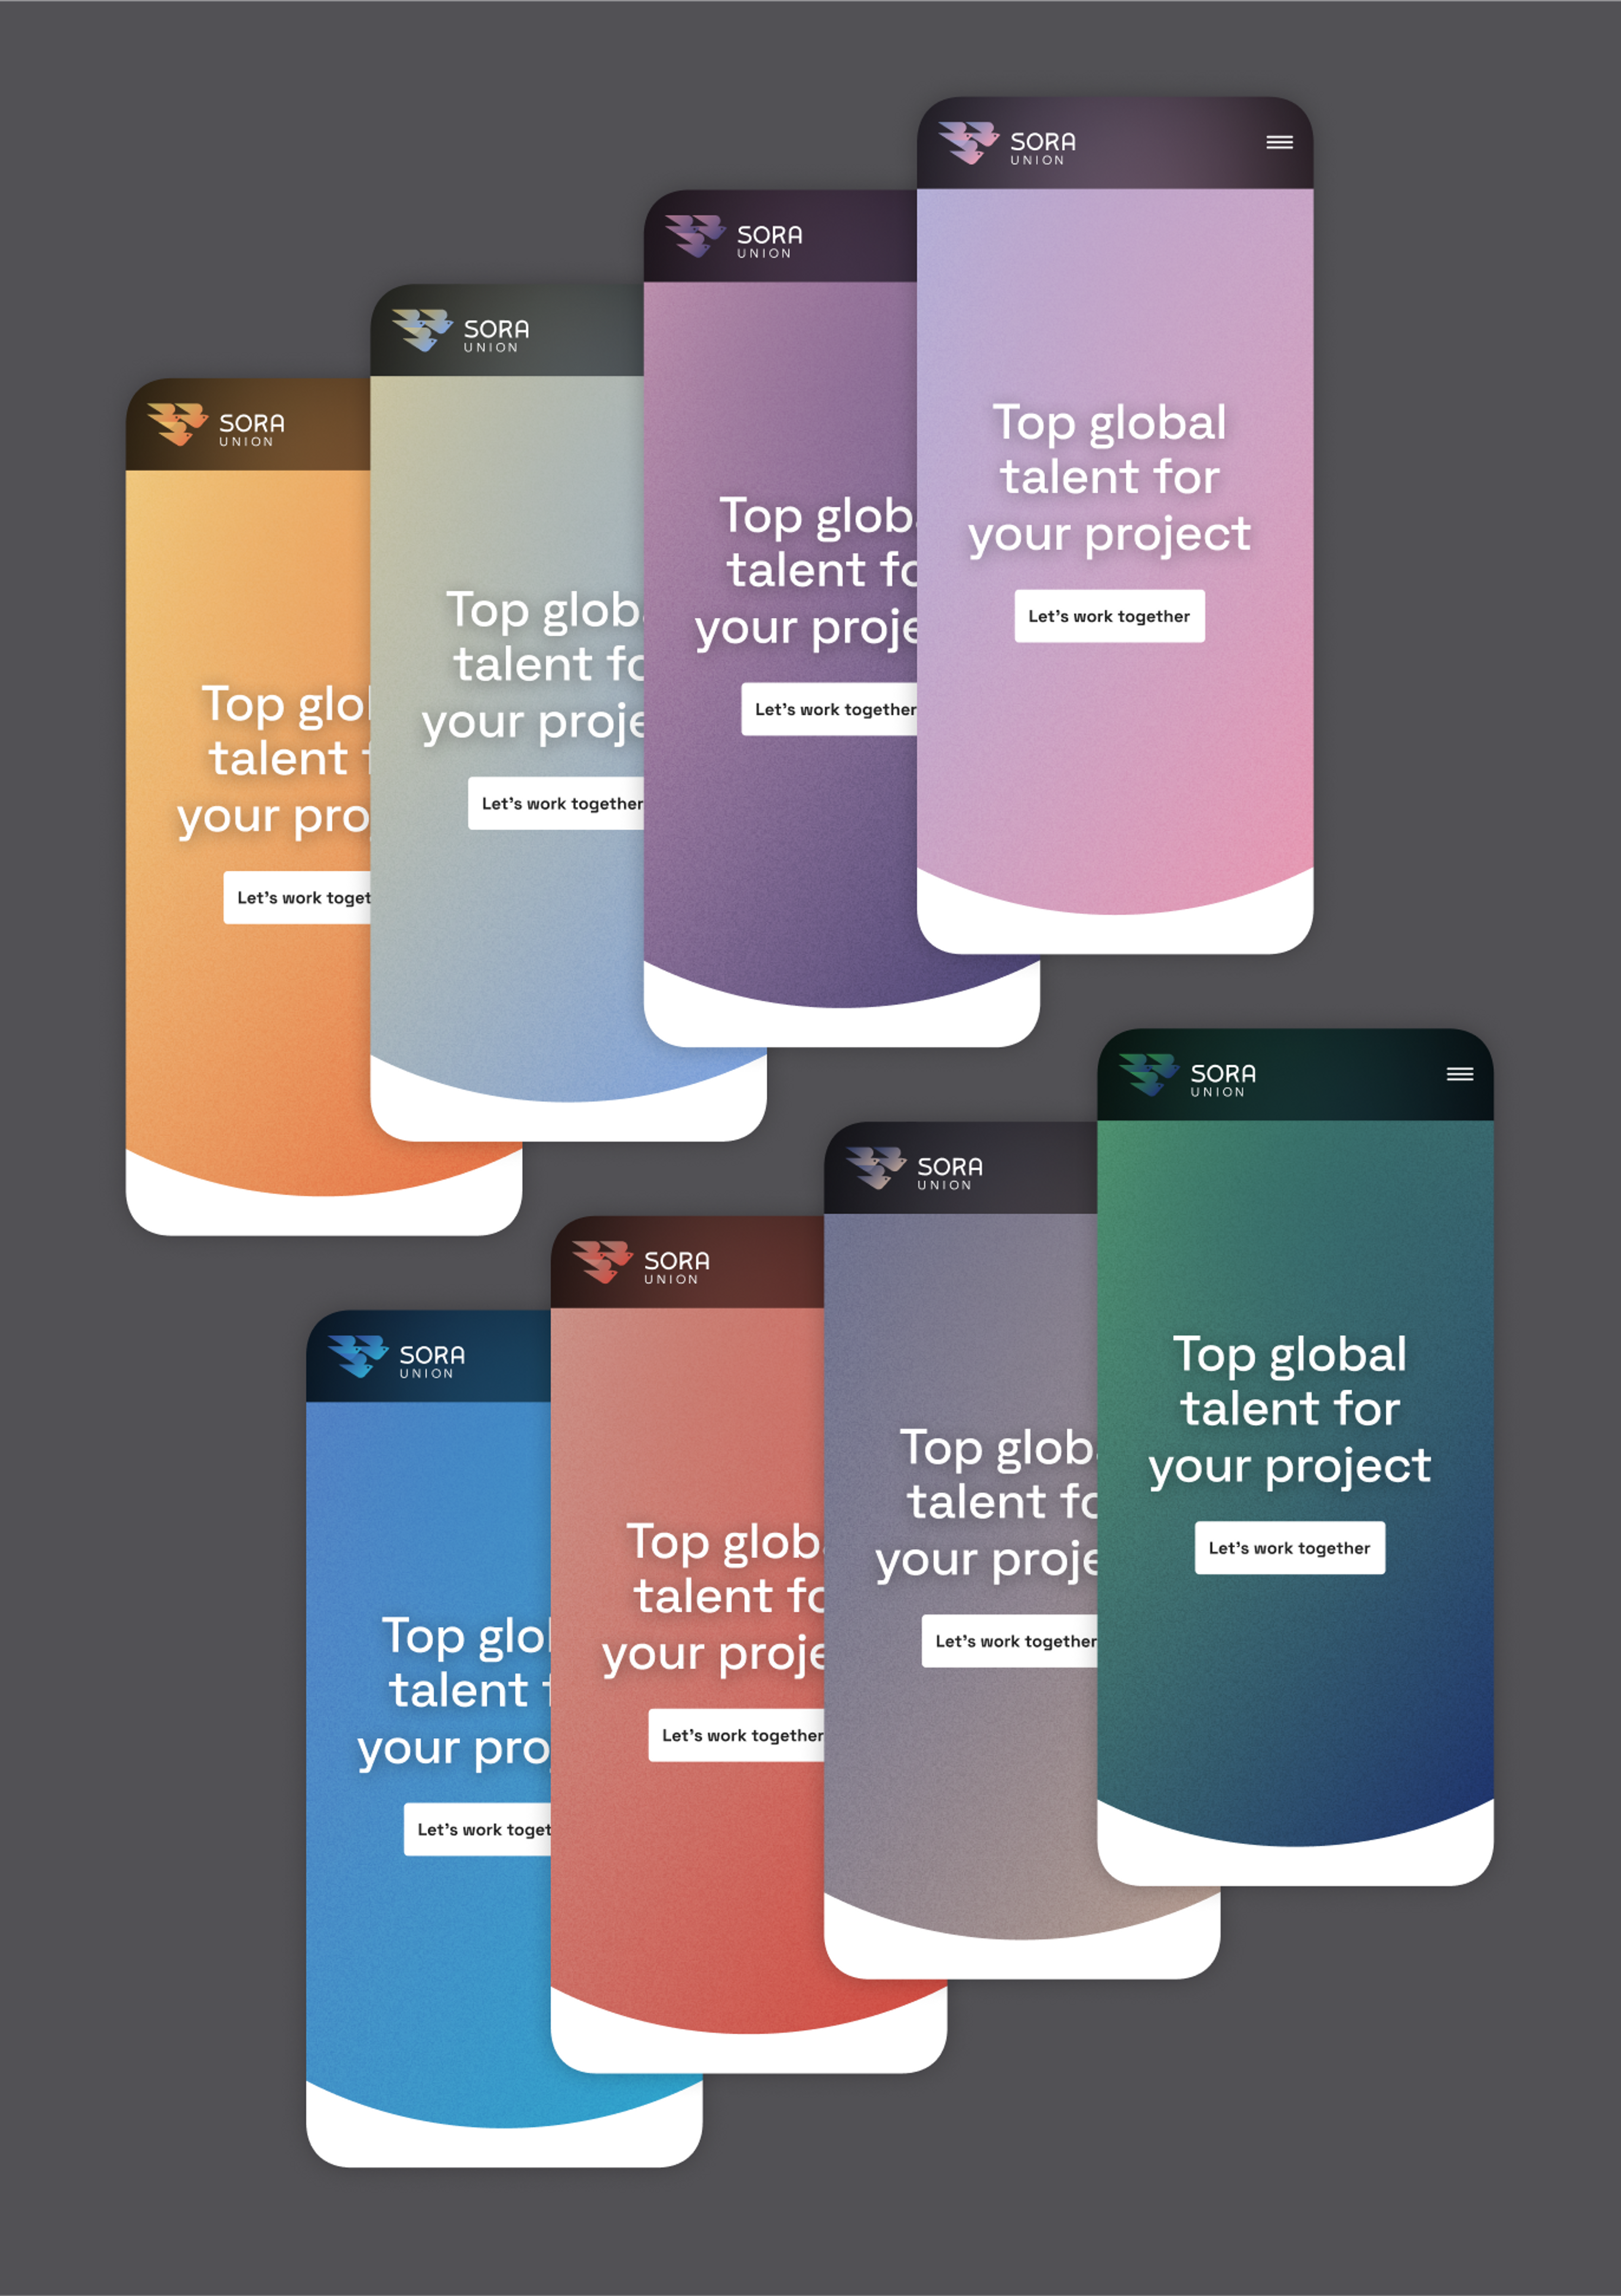 8 mobile phones displaying Sora Union's website homepage at different times of day, including a pink gradient, a purple gradient, a yellow gradient, and a green-to-purple gradient